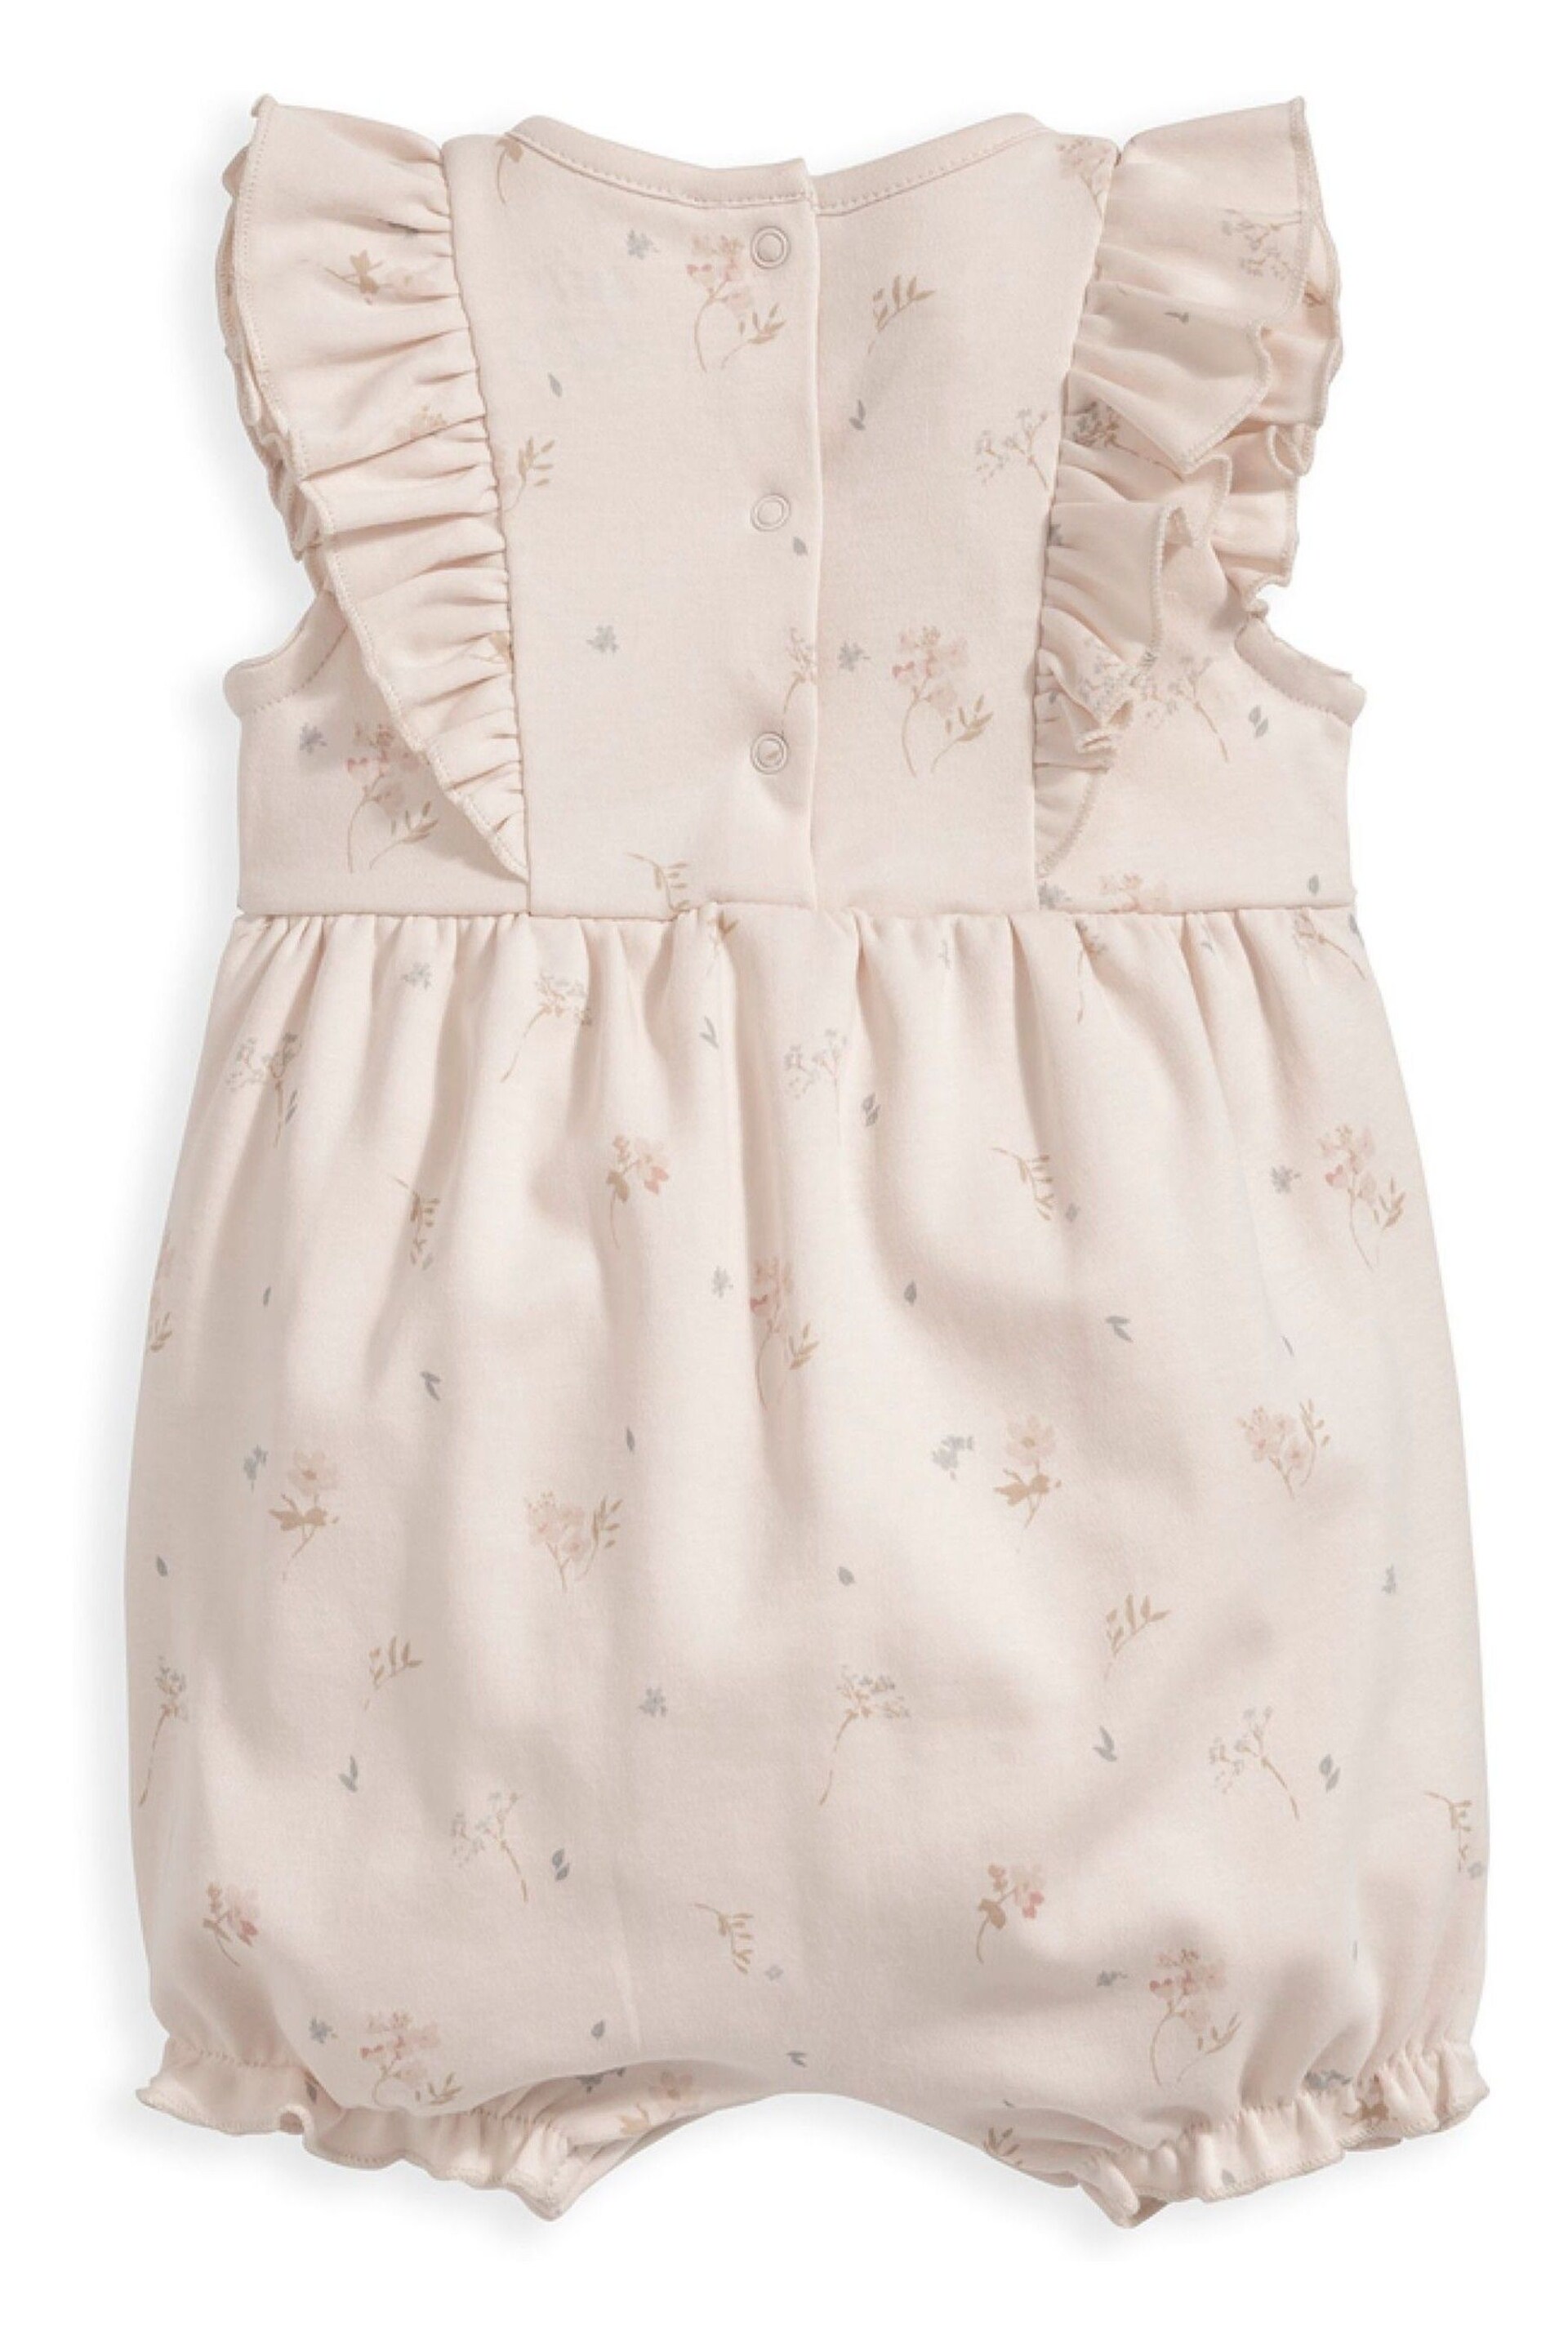 Mamas & Papas Pink Floral Frill Jersey Shortie Romper - Image 3 of 3